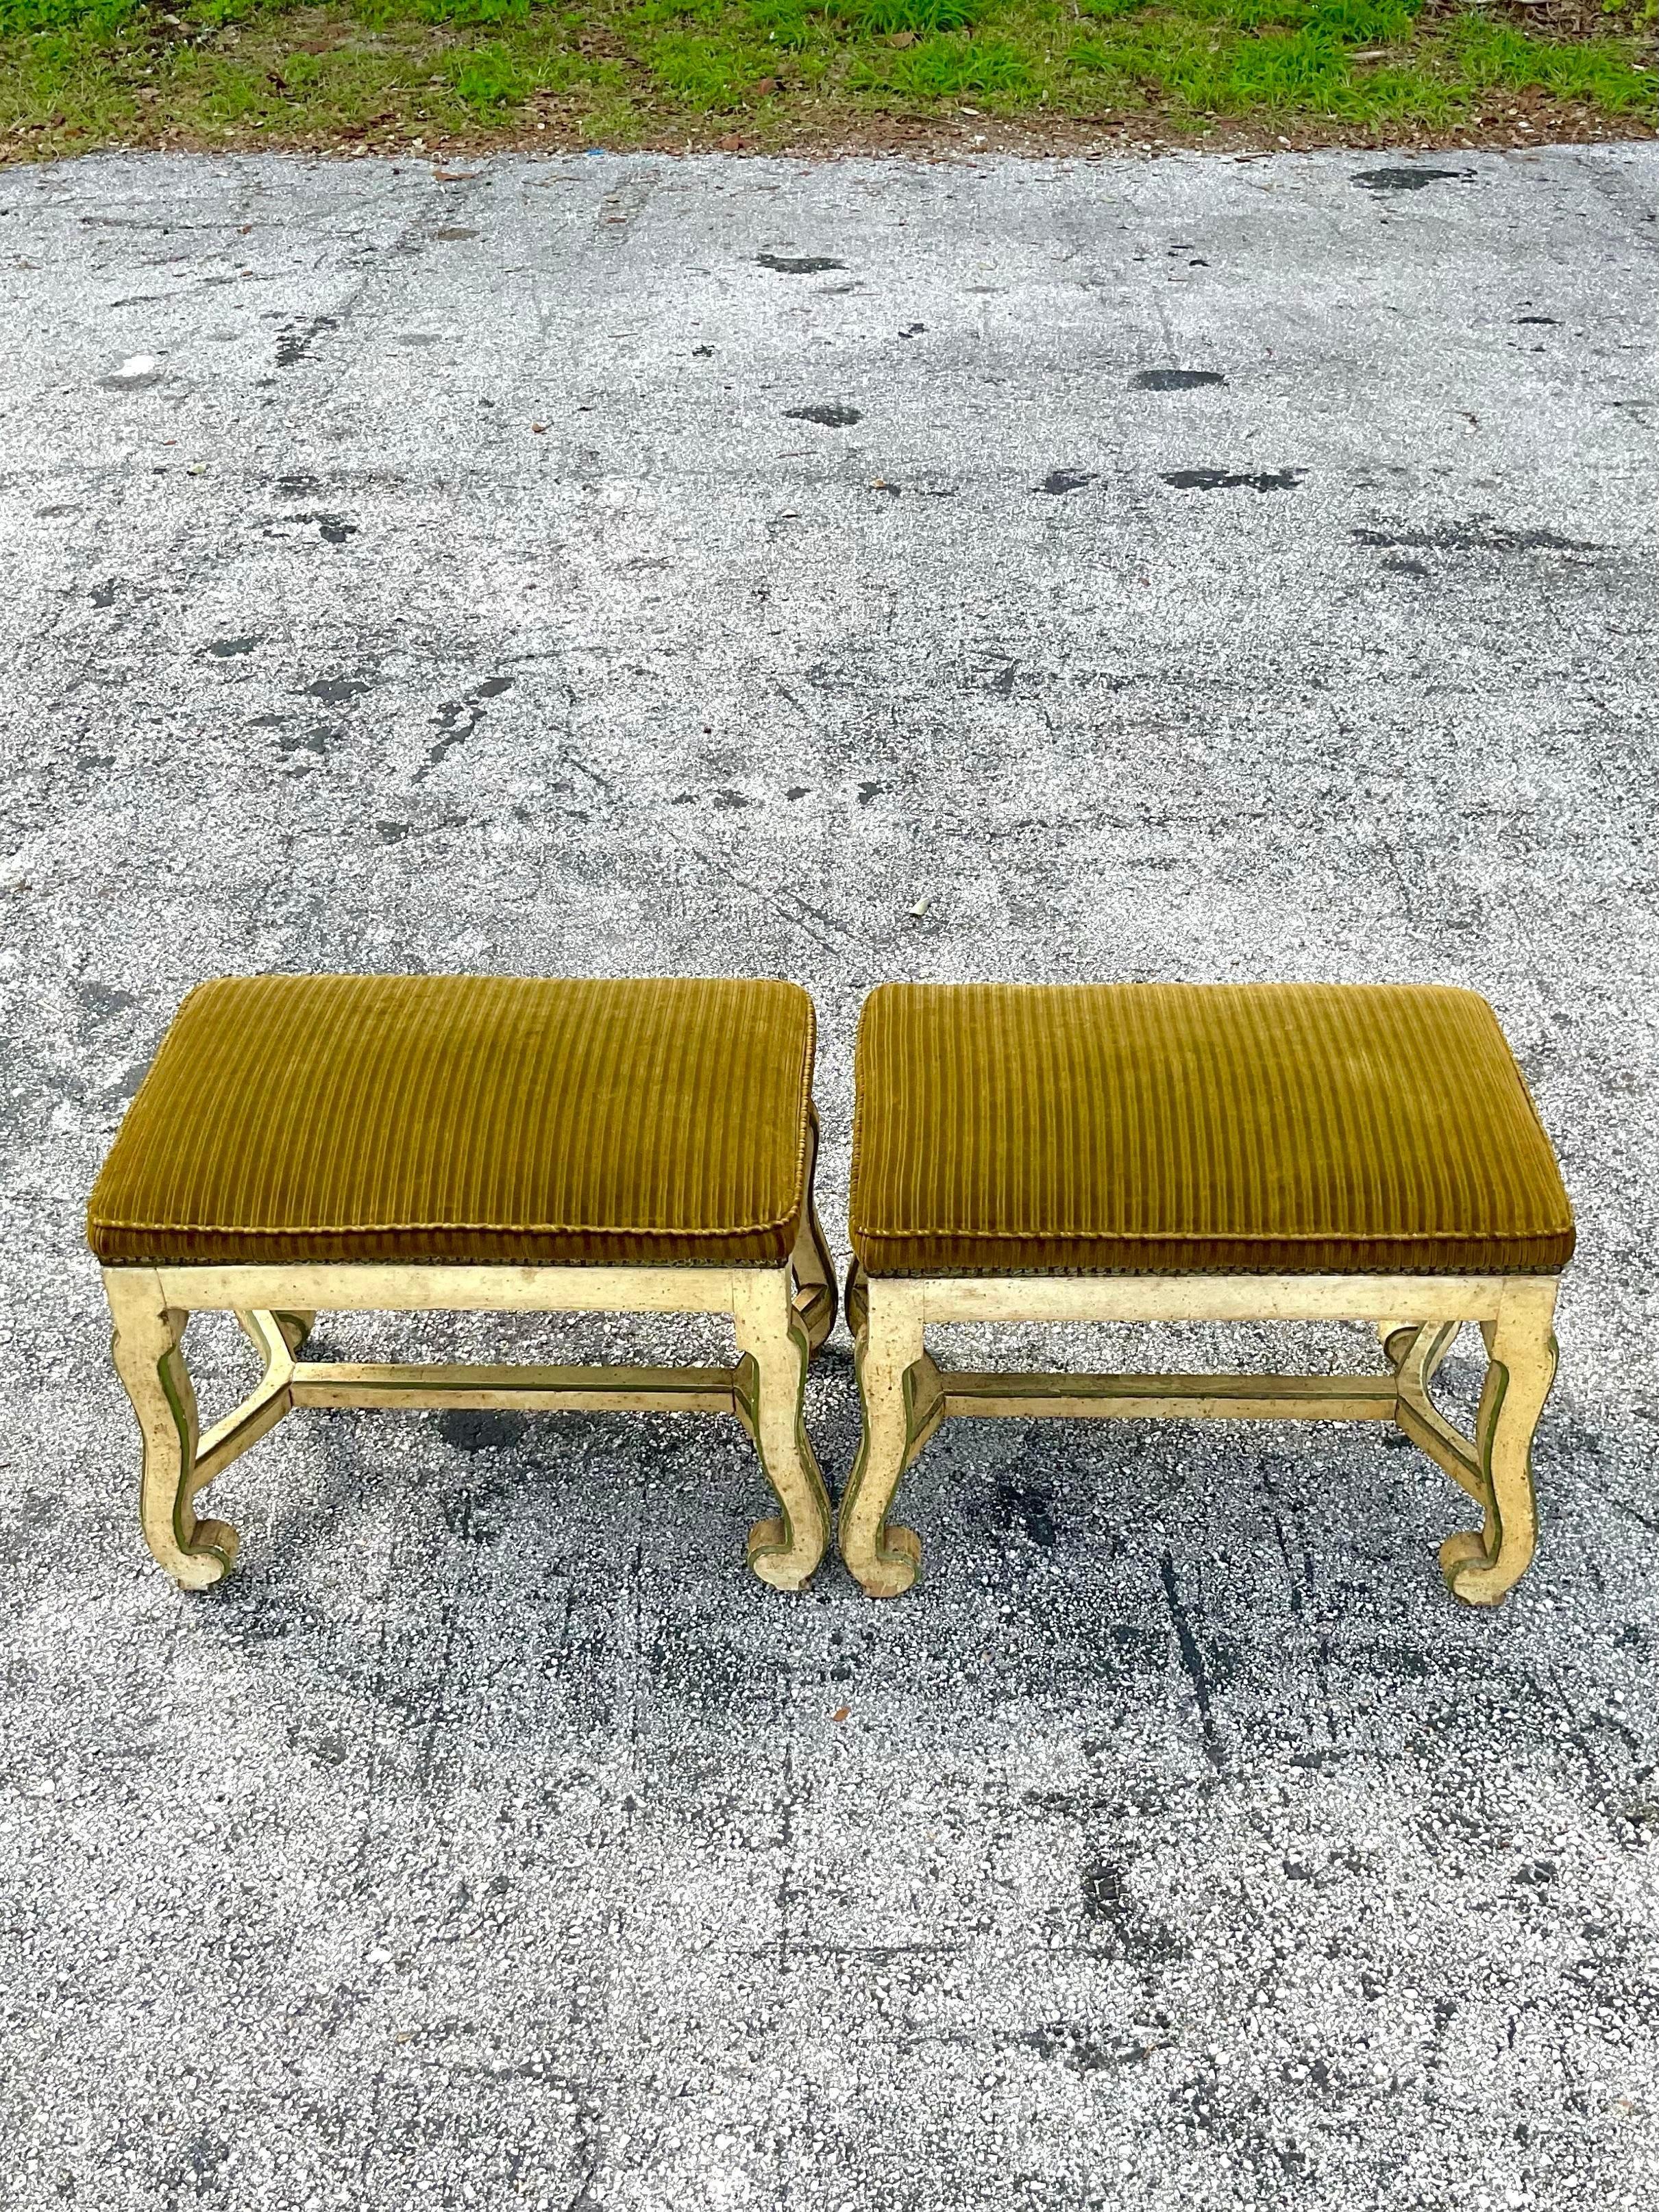 Fantastic vintage pair of corduroy upholstered painted wooden carved ottomans or stools with a fabulous nailhead trim around the base and matched piping at the top. Perfect addition to any salon needing a touch of old world elegance and modern day